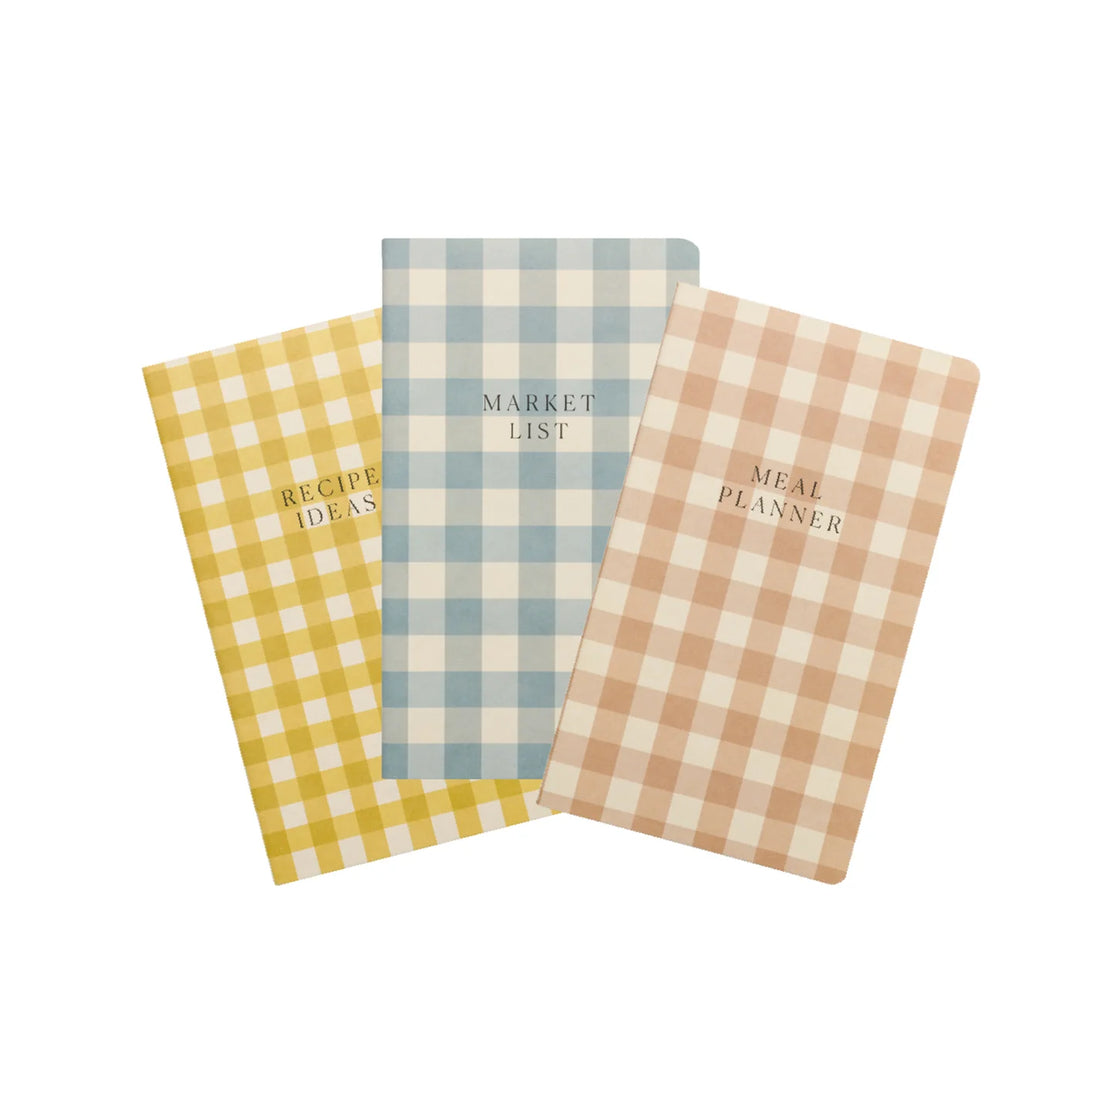 Kitchen Planners Set of 3 Notebooks